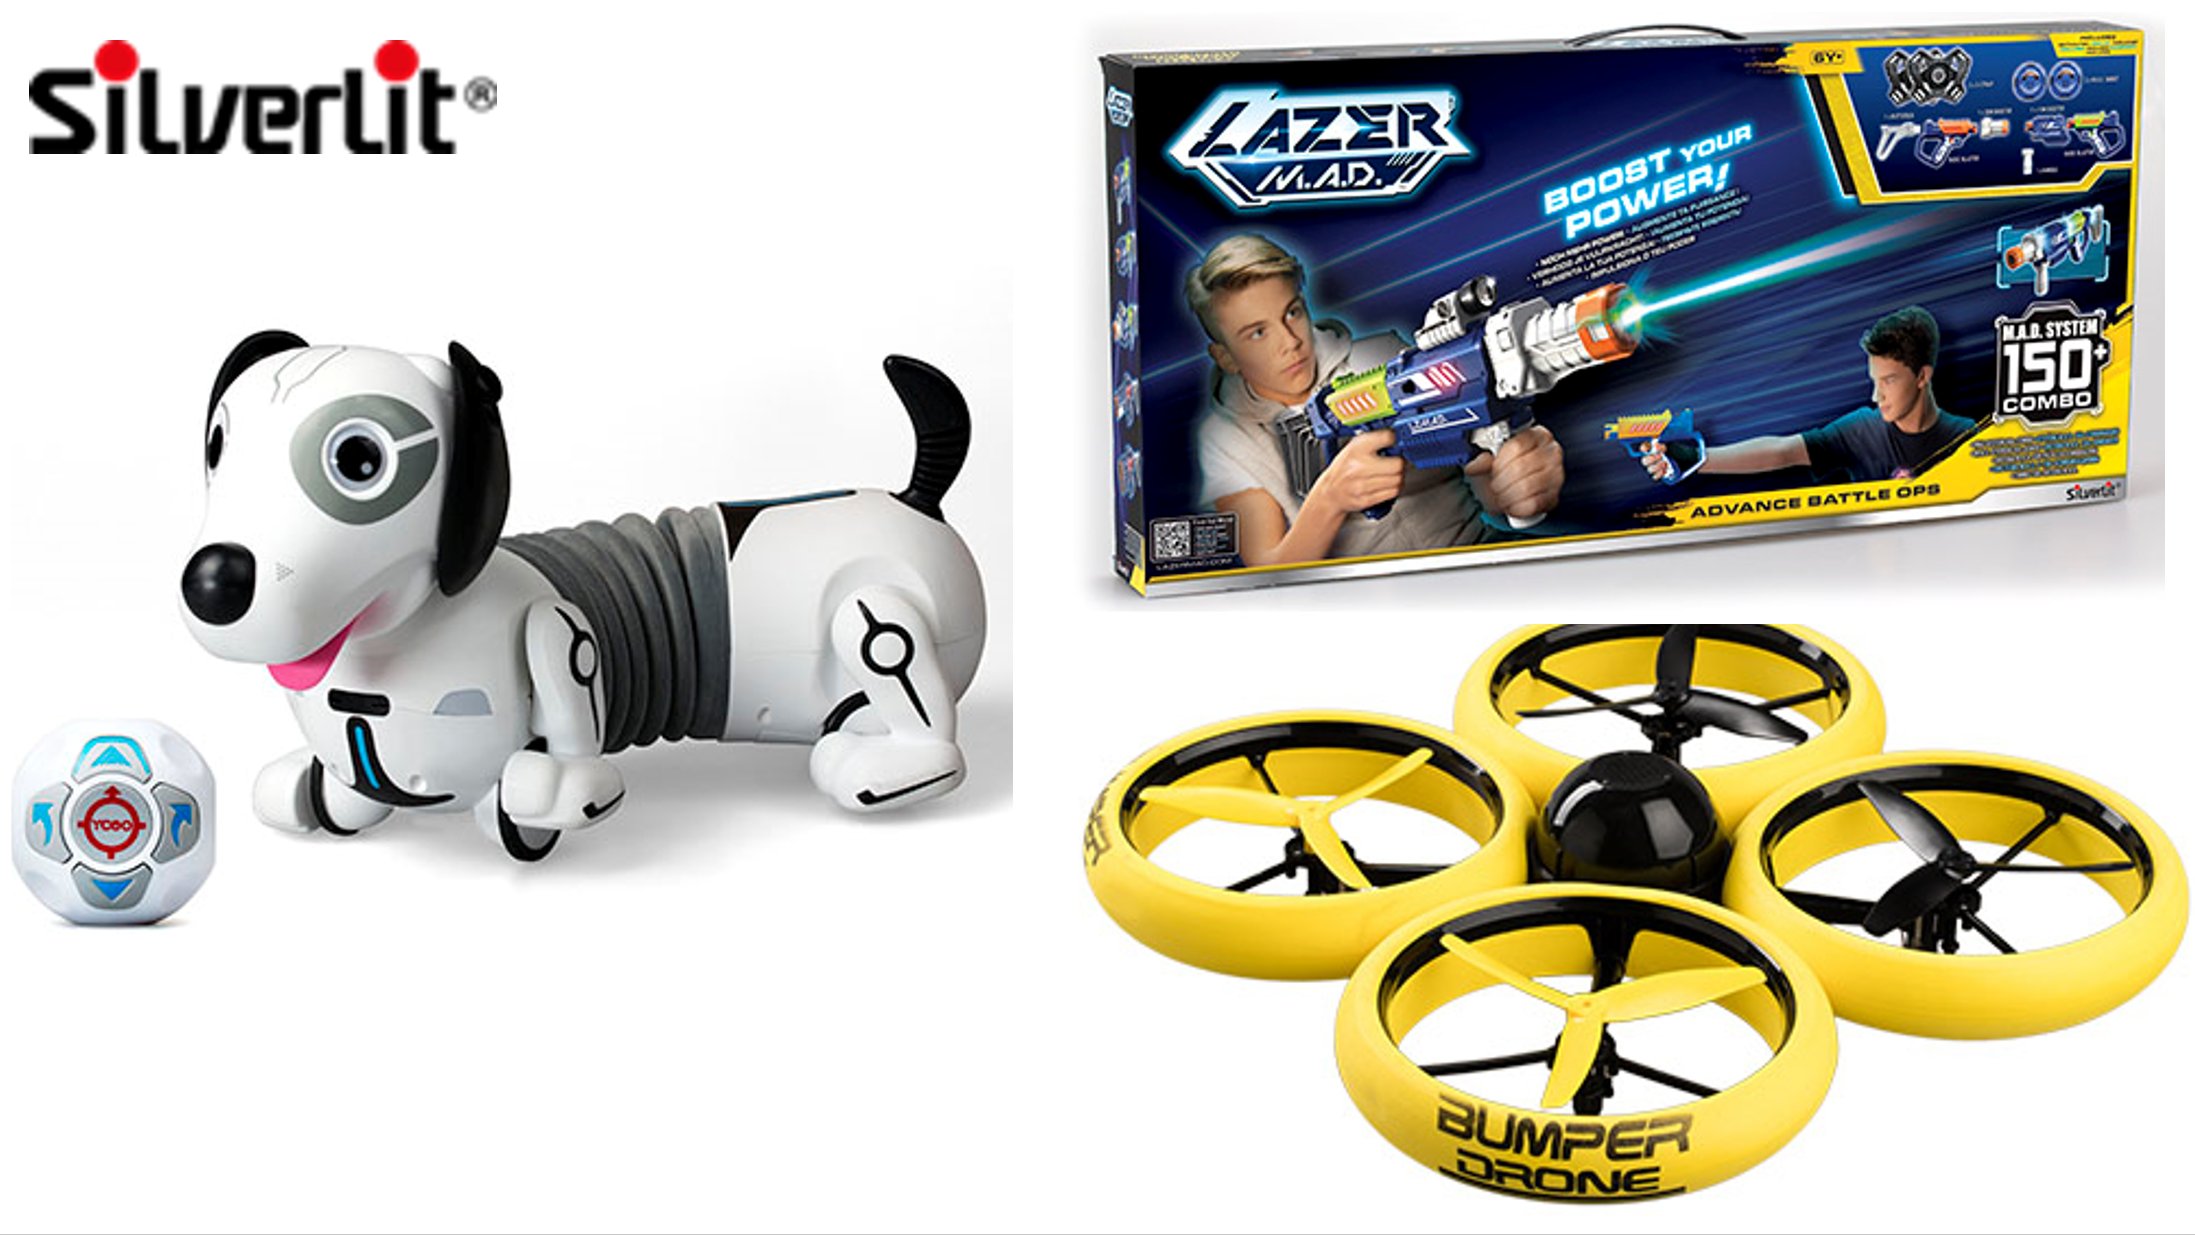 China Toy Expo Twitter: "Check out the products by #CertifiedSupplier Flybotic Bumper #Drone YCOO Robo Dackel Lively Robotic #Puppy #Laser Advance Battle Ops Test Reports: EN71-1-2-3, EN60825, EN62115,